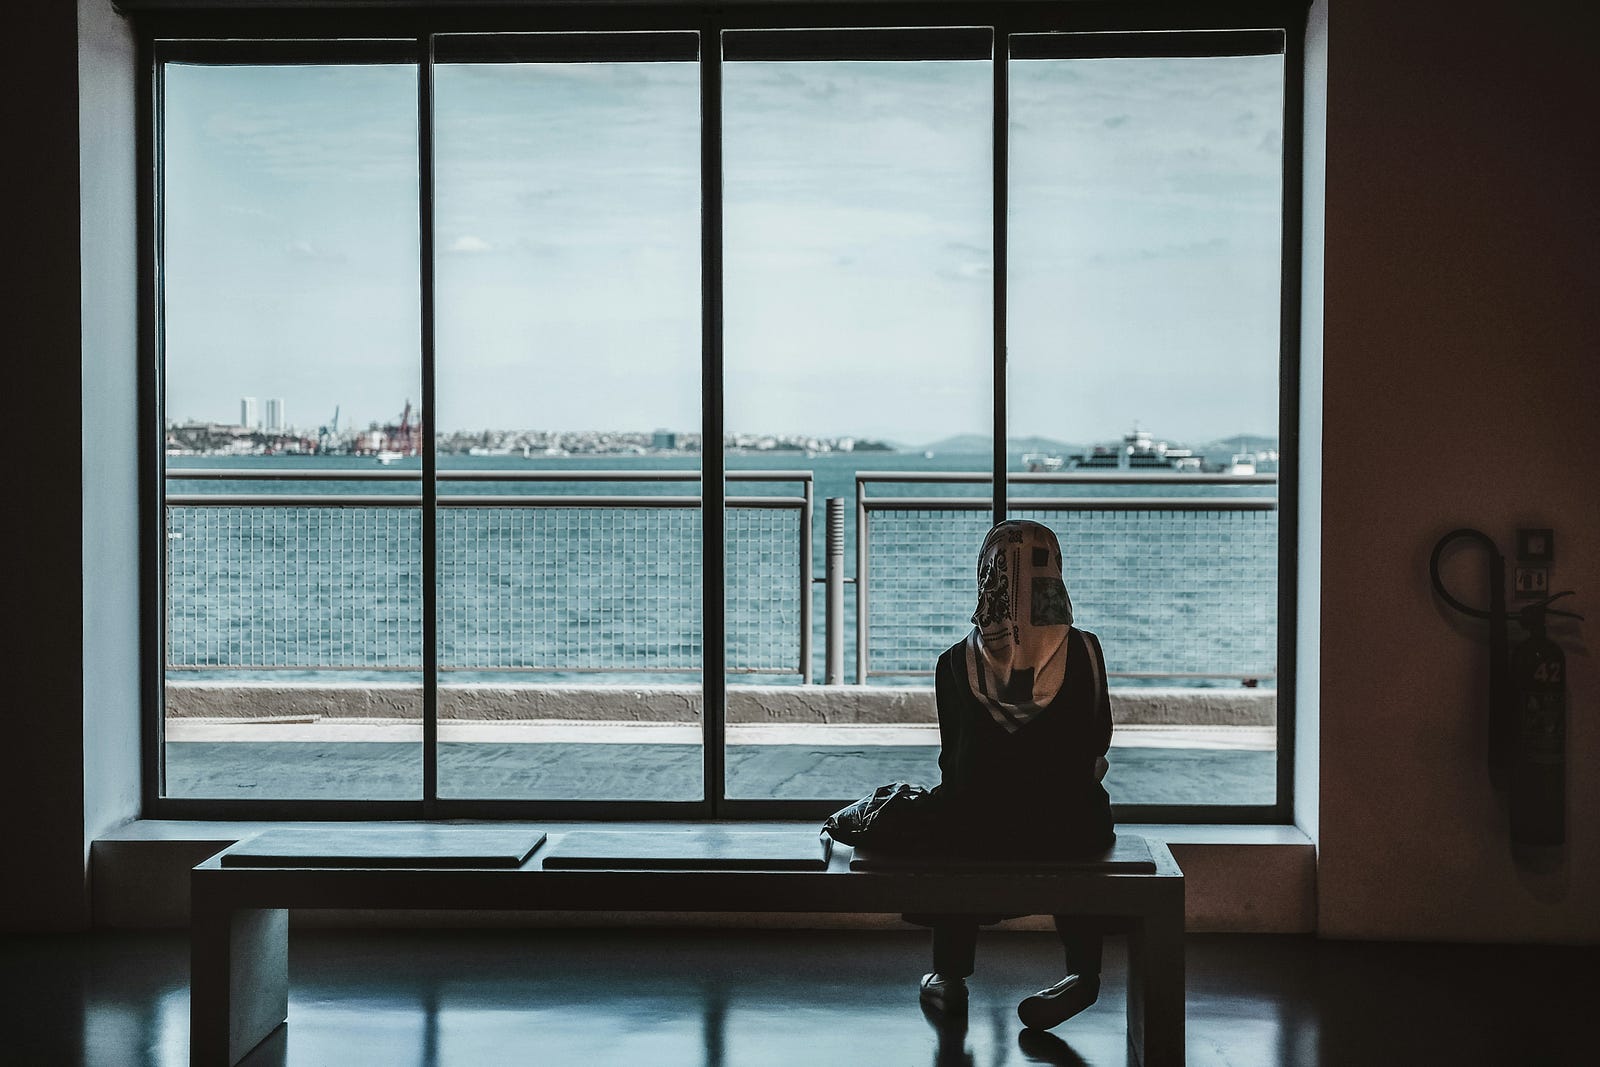 A person sits on the right end of a bench as she peers outside of a large window. We see water in the distance.